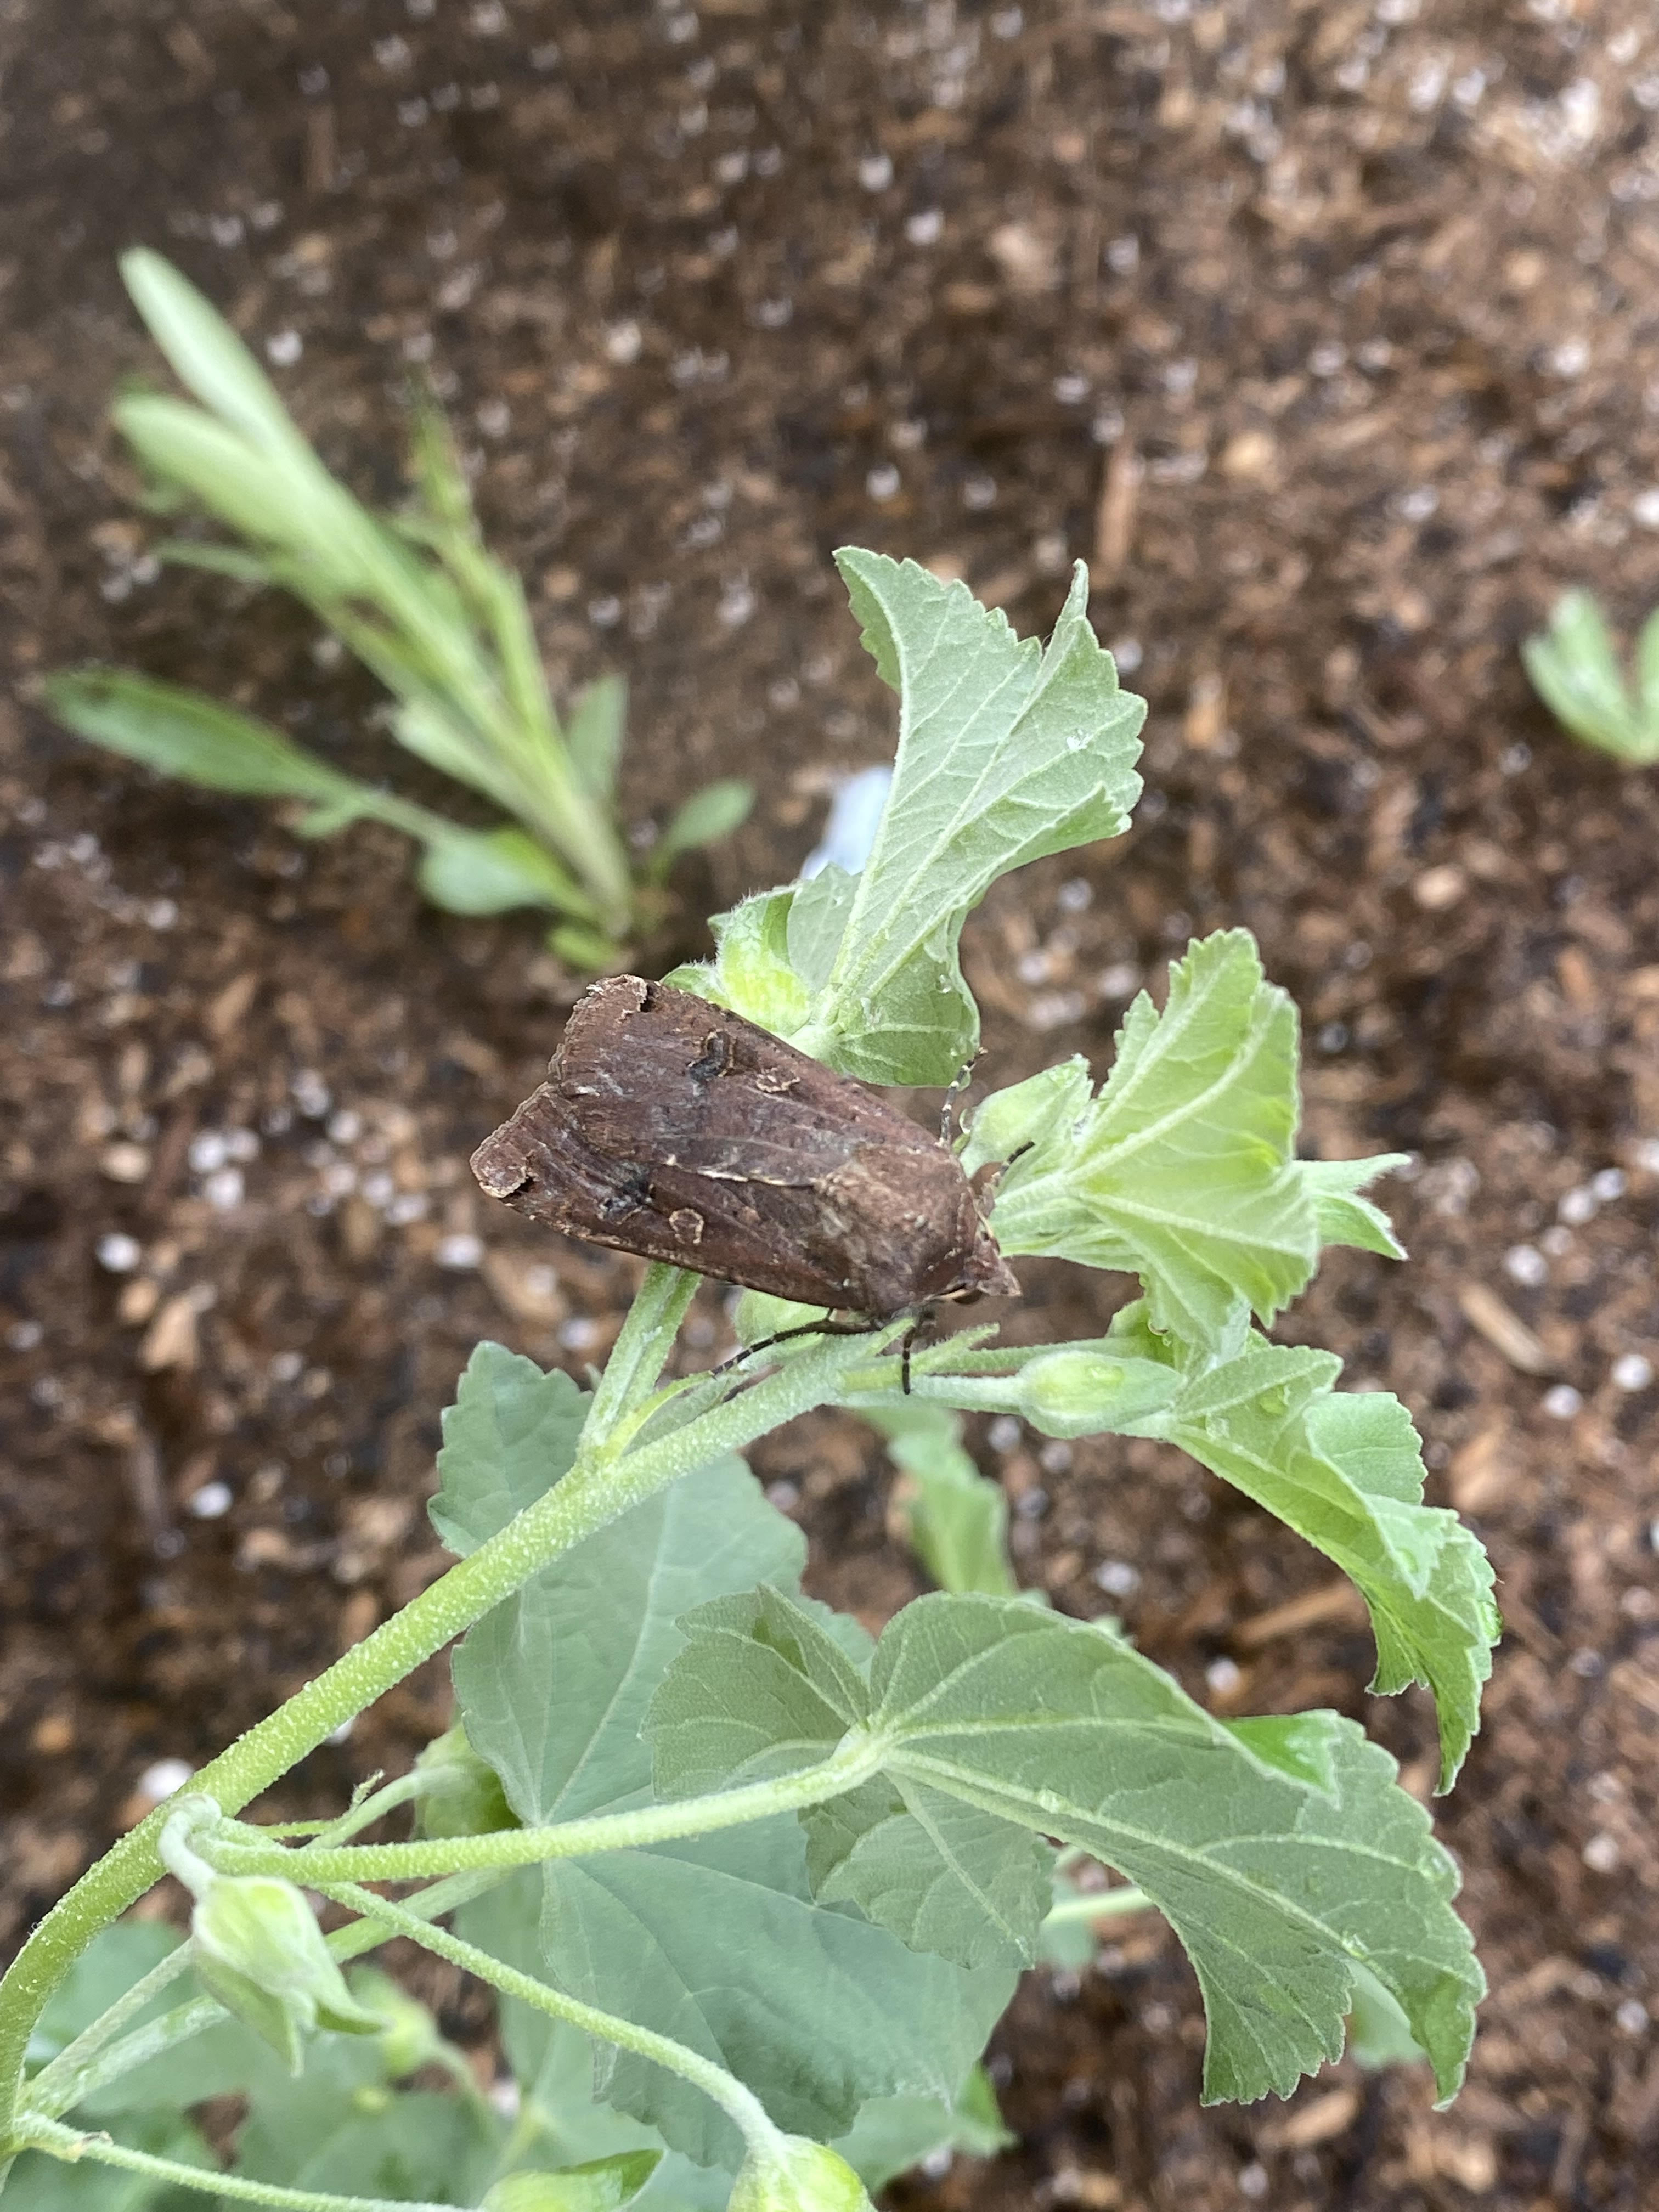 Picture of a moth on plant in garden.